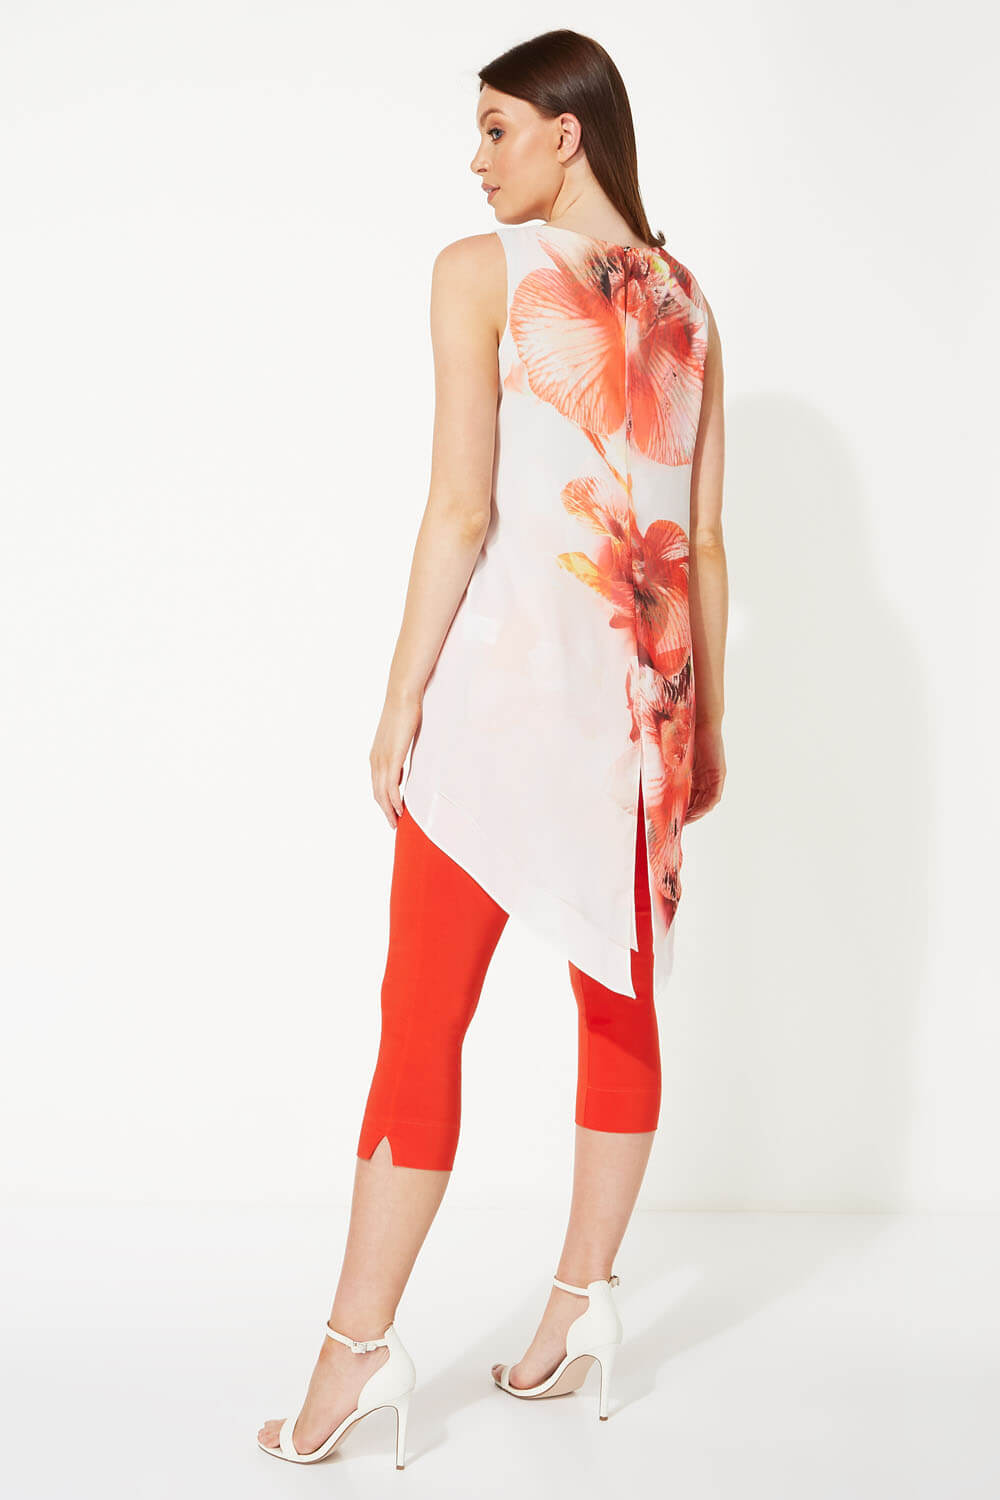 Red Floral Print Asymmetric Chiffon Top , Image 3 of 5